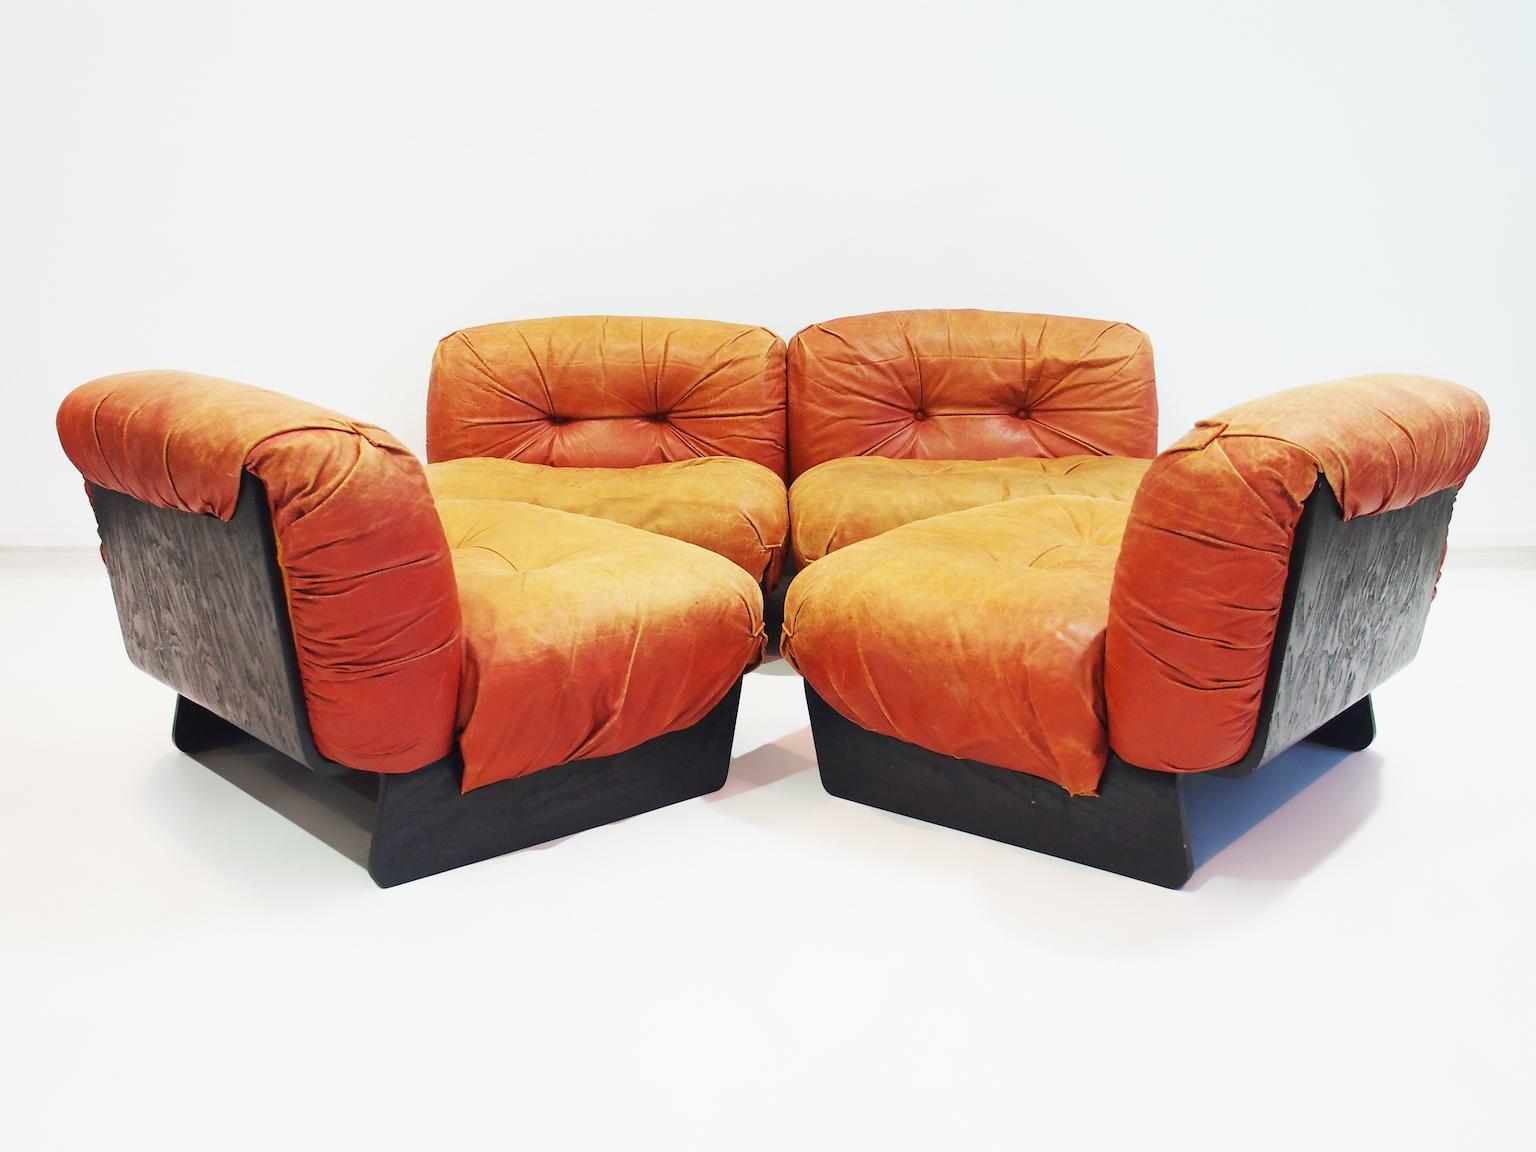 20th Century Set of Four Giuseppe Munari Modular Lounge Chairs Upholstered in Cognac Leather For Sale